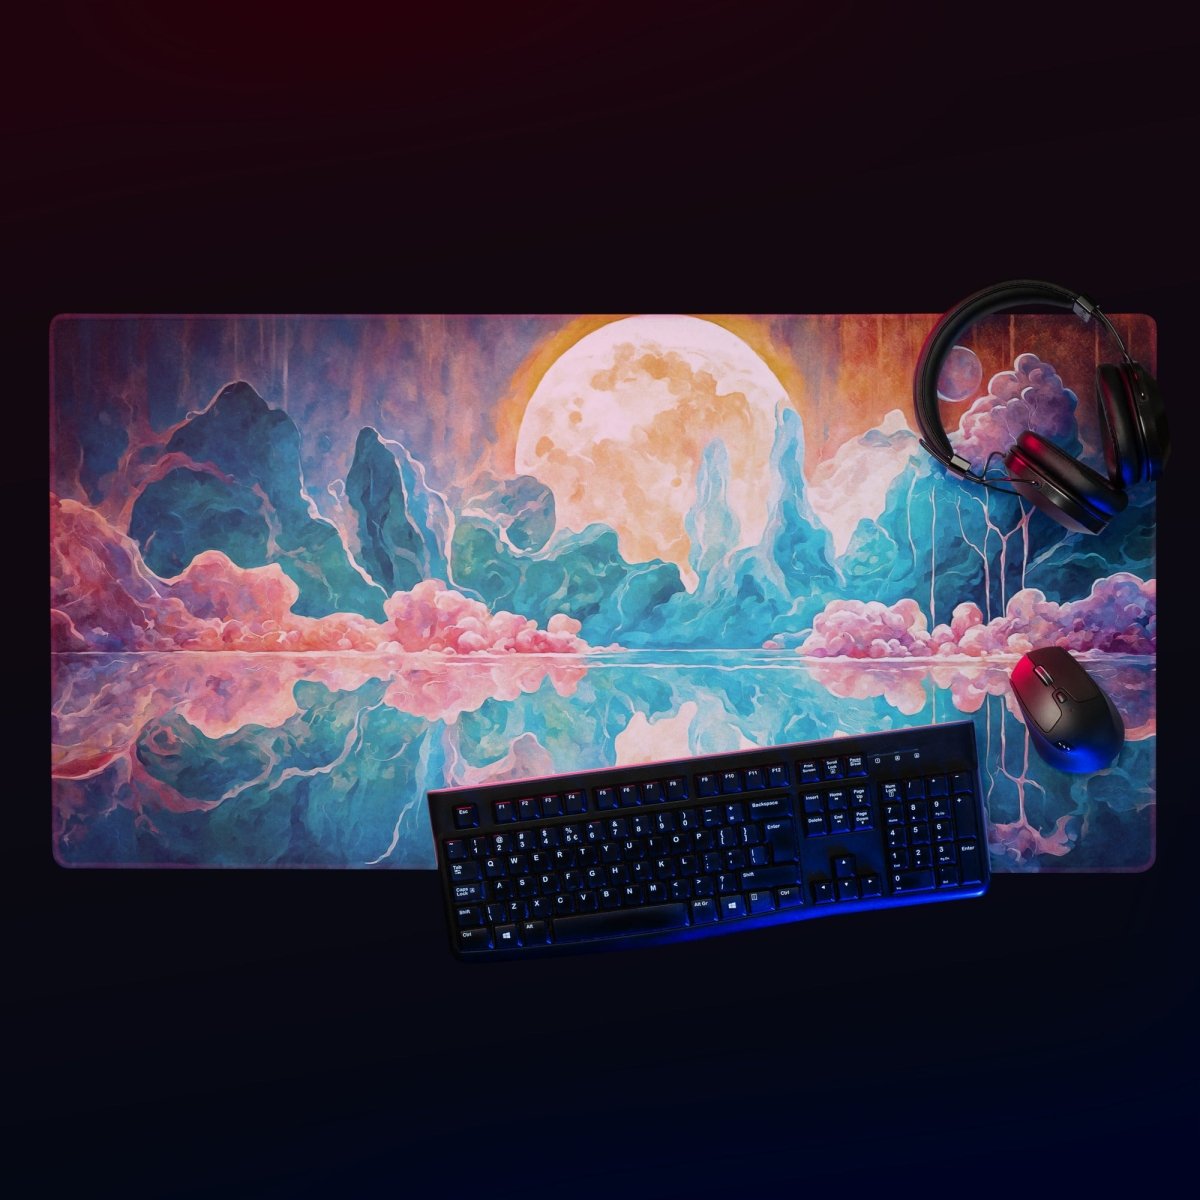 Mystic mountain - Gaming mouse pad - Ever colorful